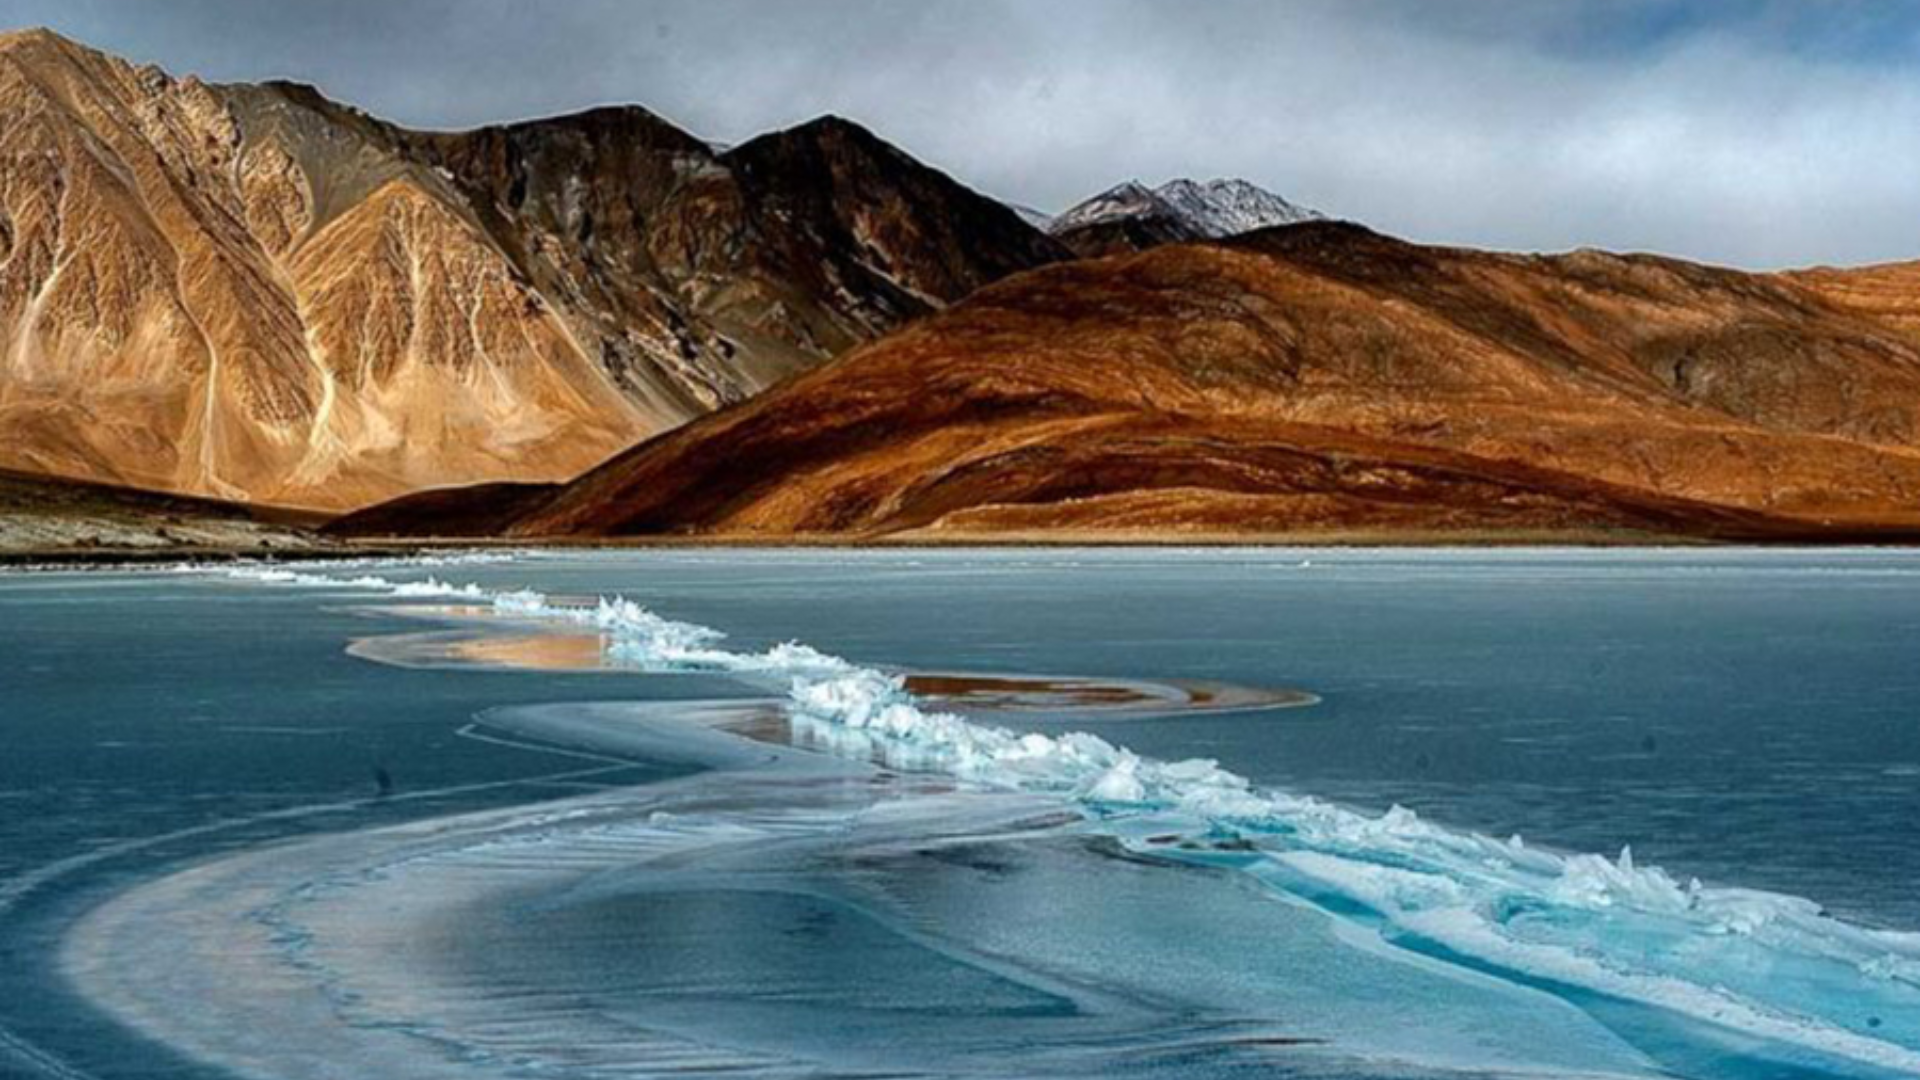 IMD Issues Warning As Water Levels Of Ladakh’s Rivers Rise Due To Glacial Melt